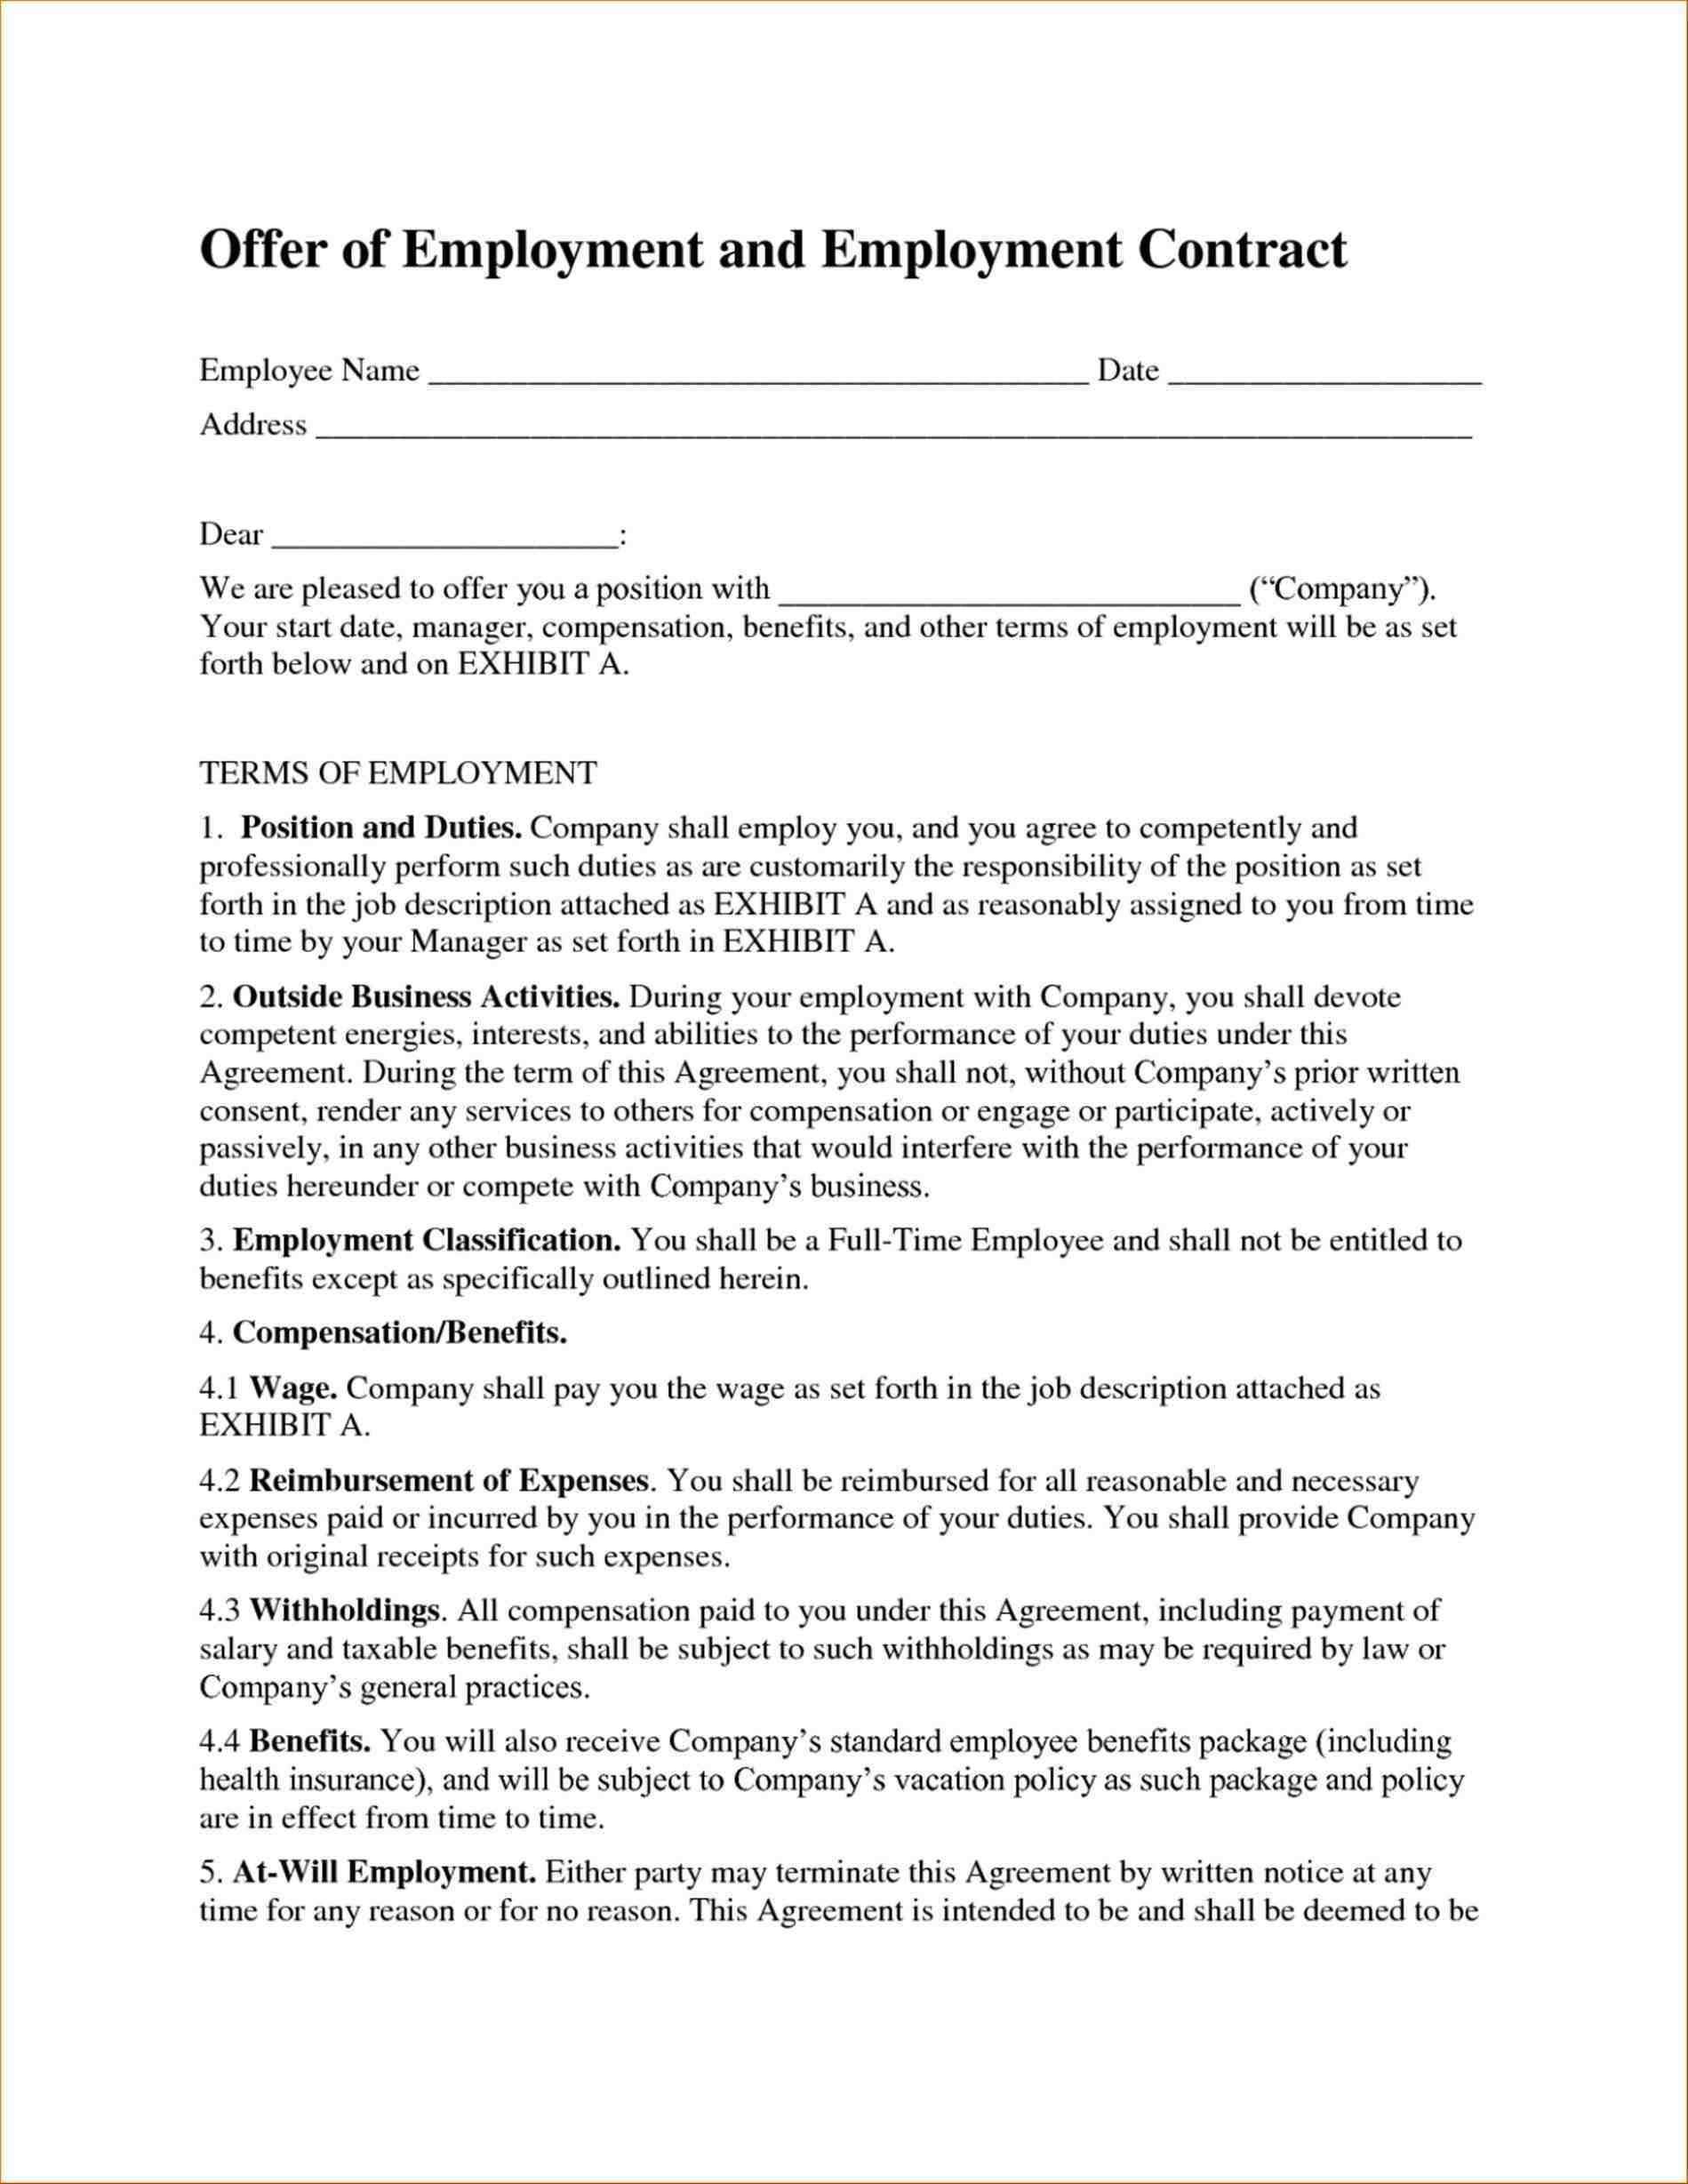 ncnd agreement template ncnd agreement template working agreement 